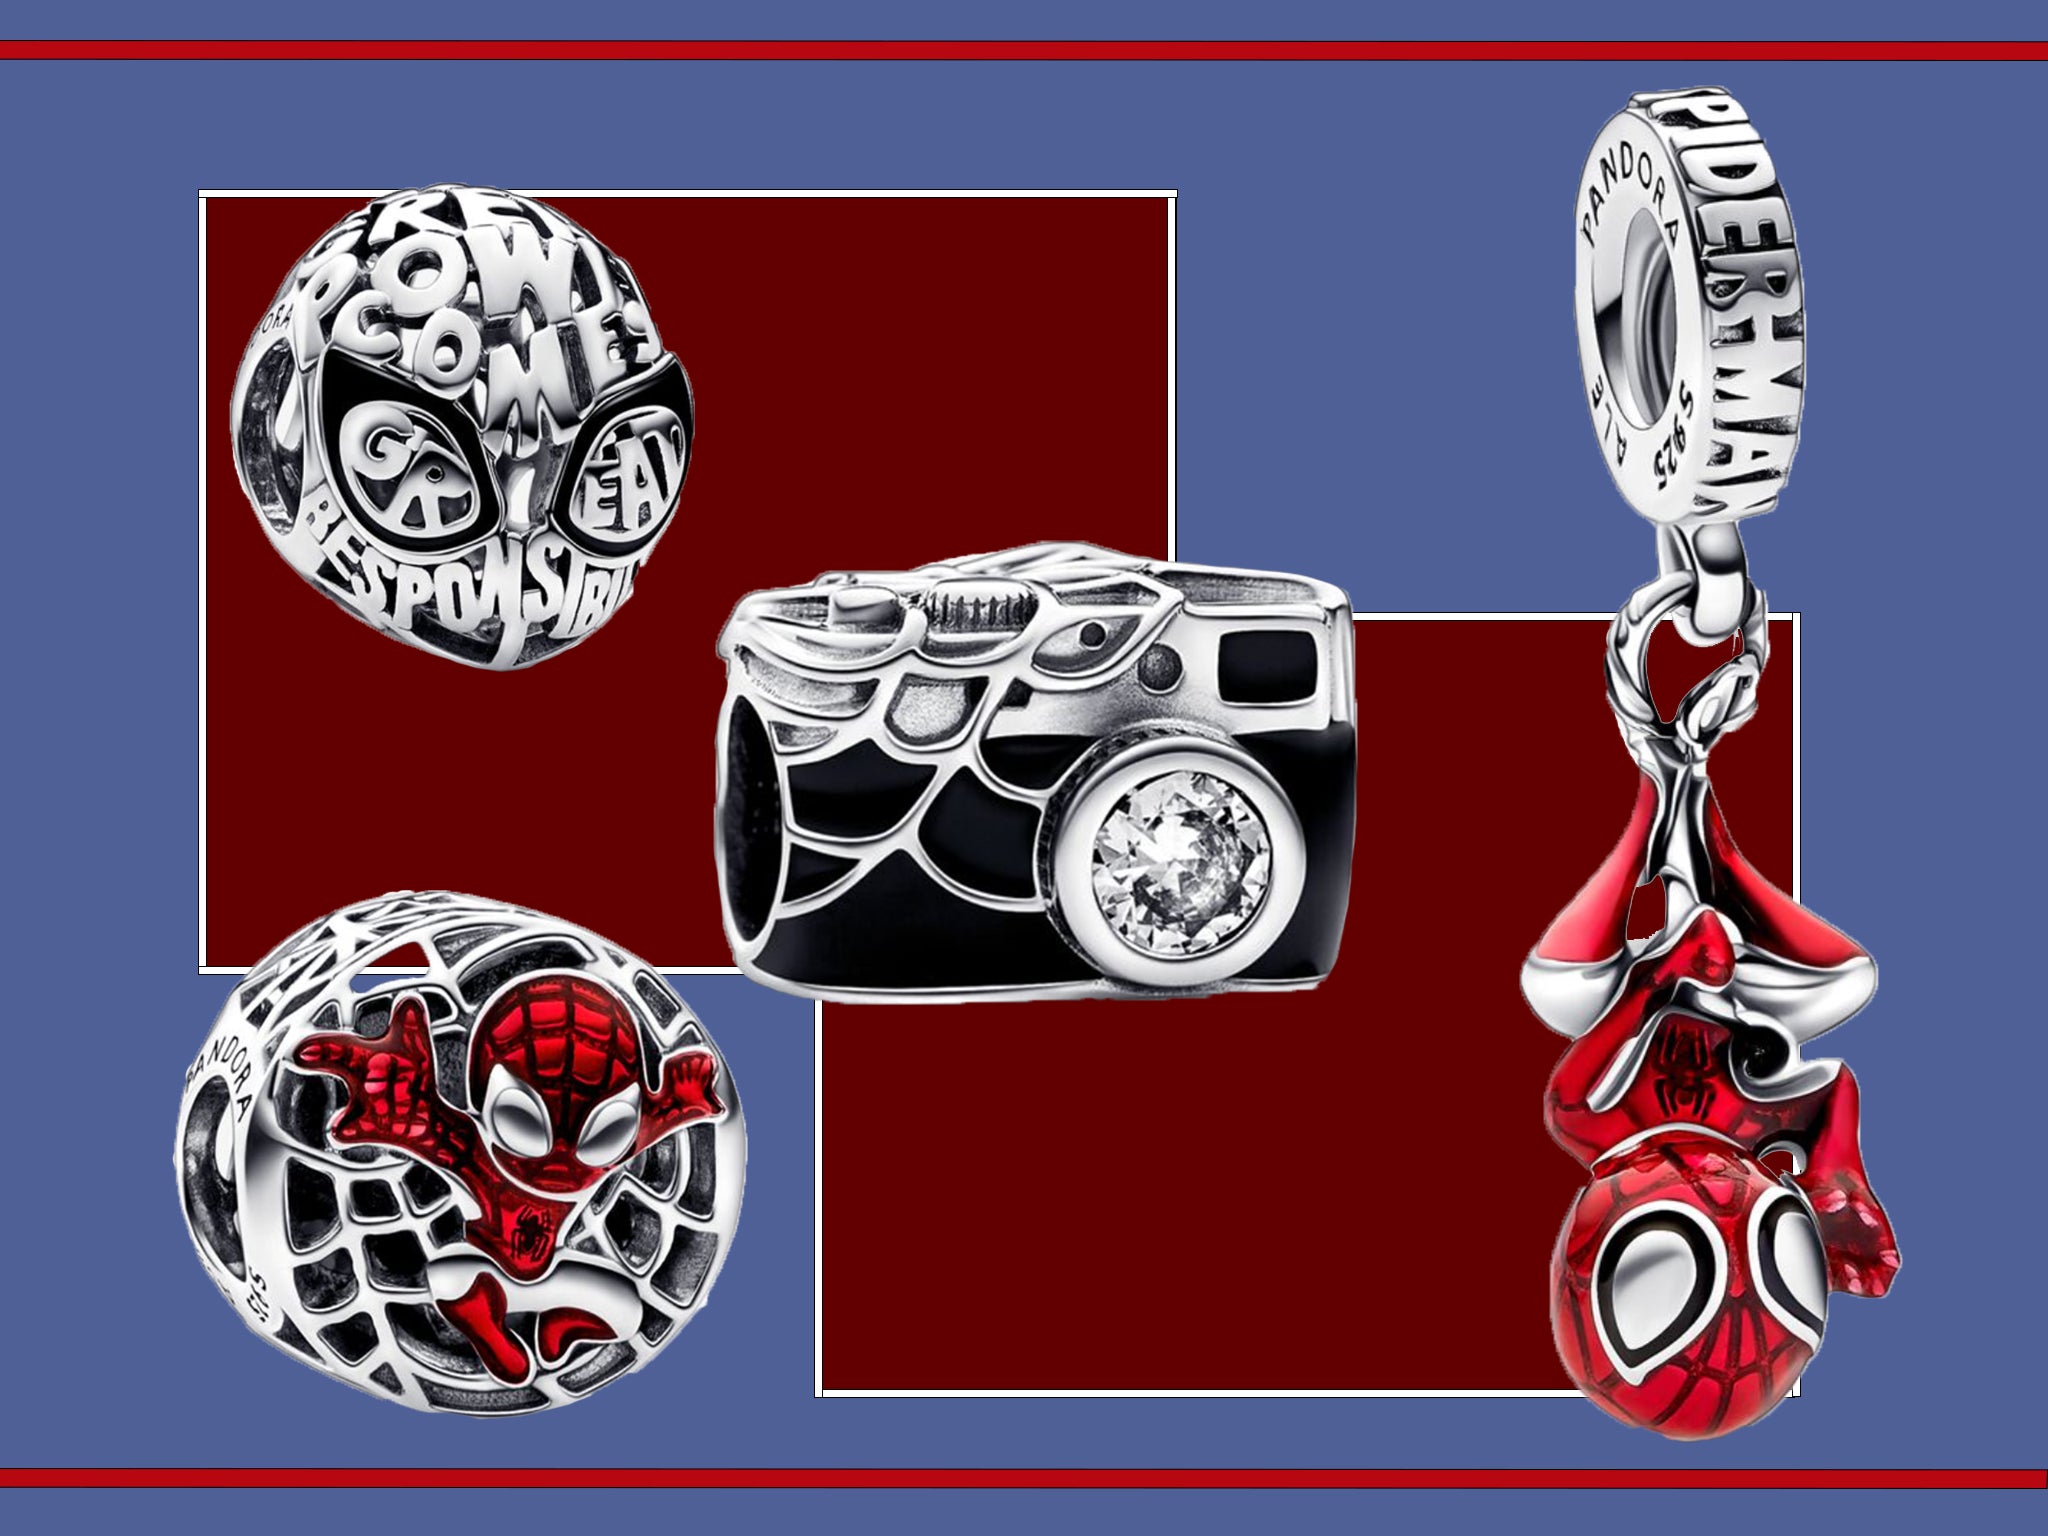 This is the second Pandora and Marvel collaboration, and it features one of the franchise’s most popular characters